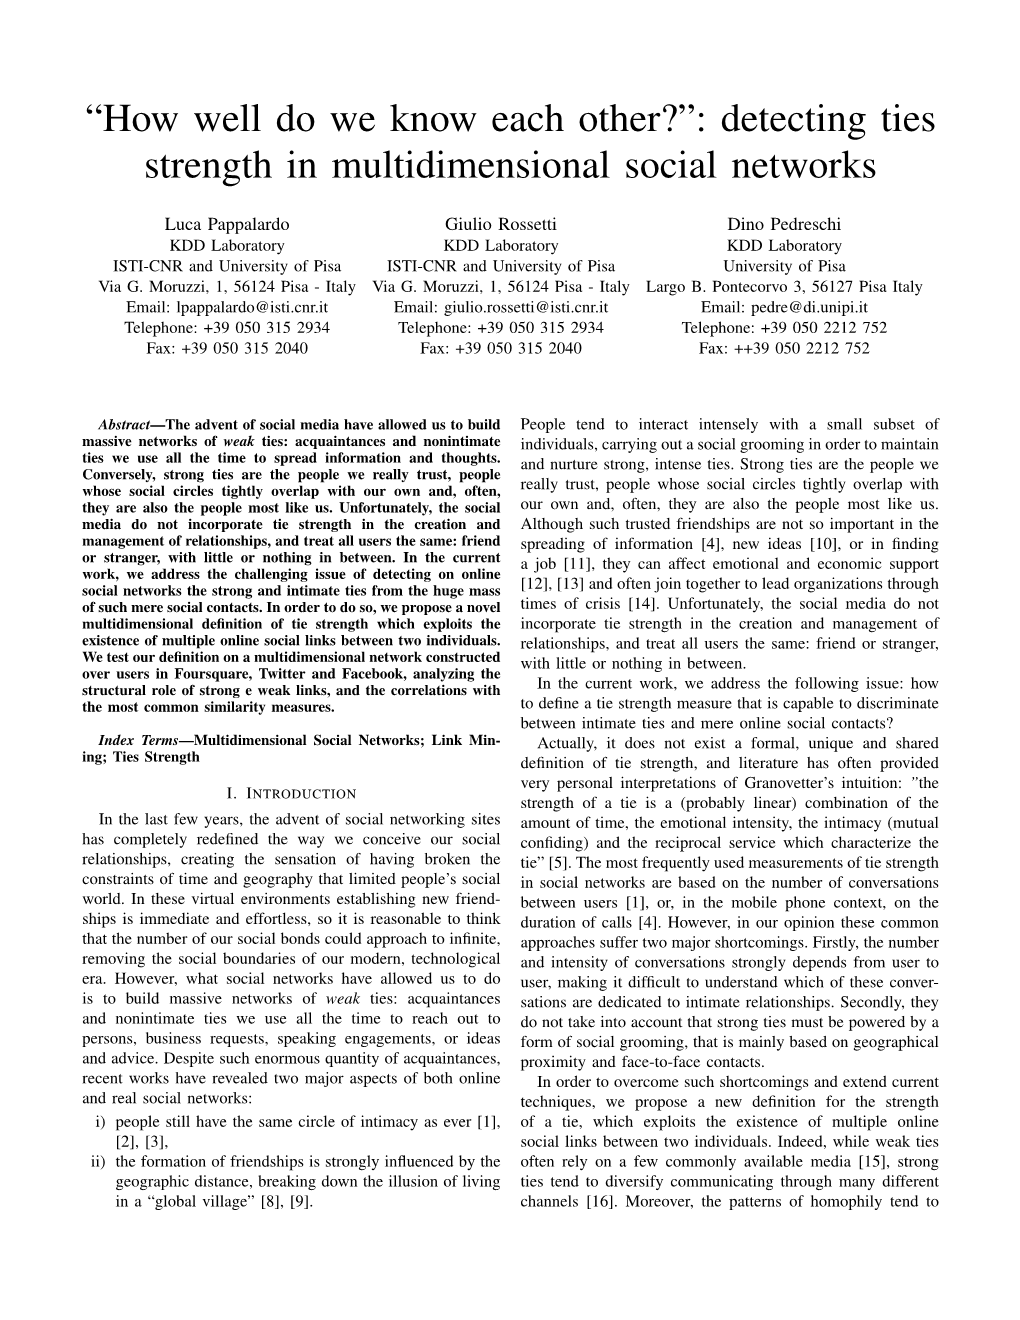 “How Well Do We Know Each Other?”: Detecting Ties Strength in Multidimensional Social Networks